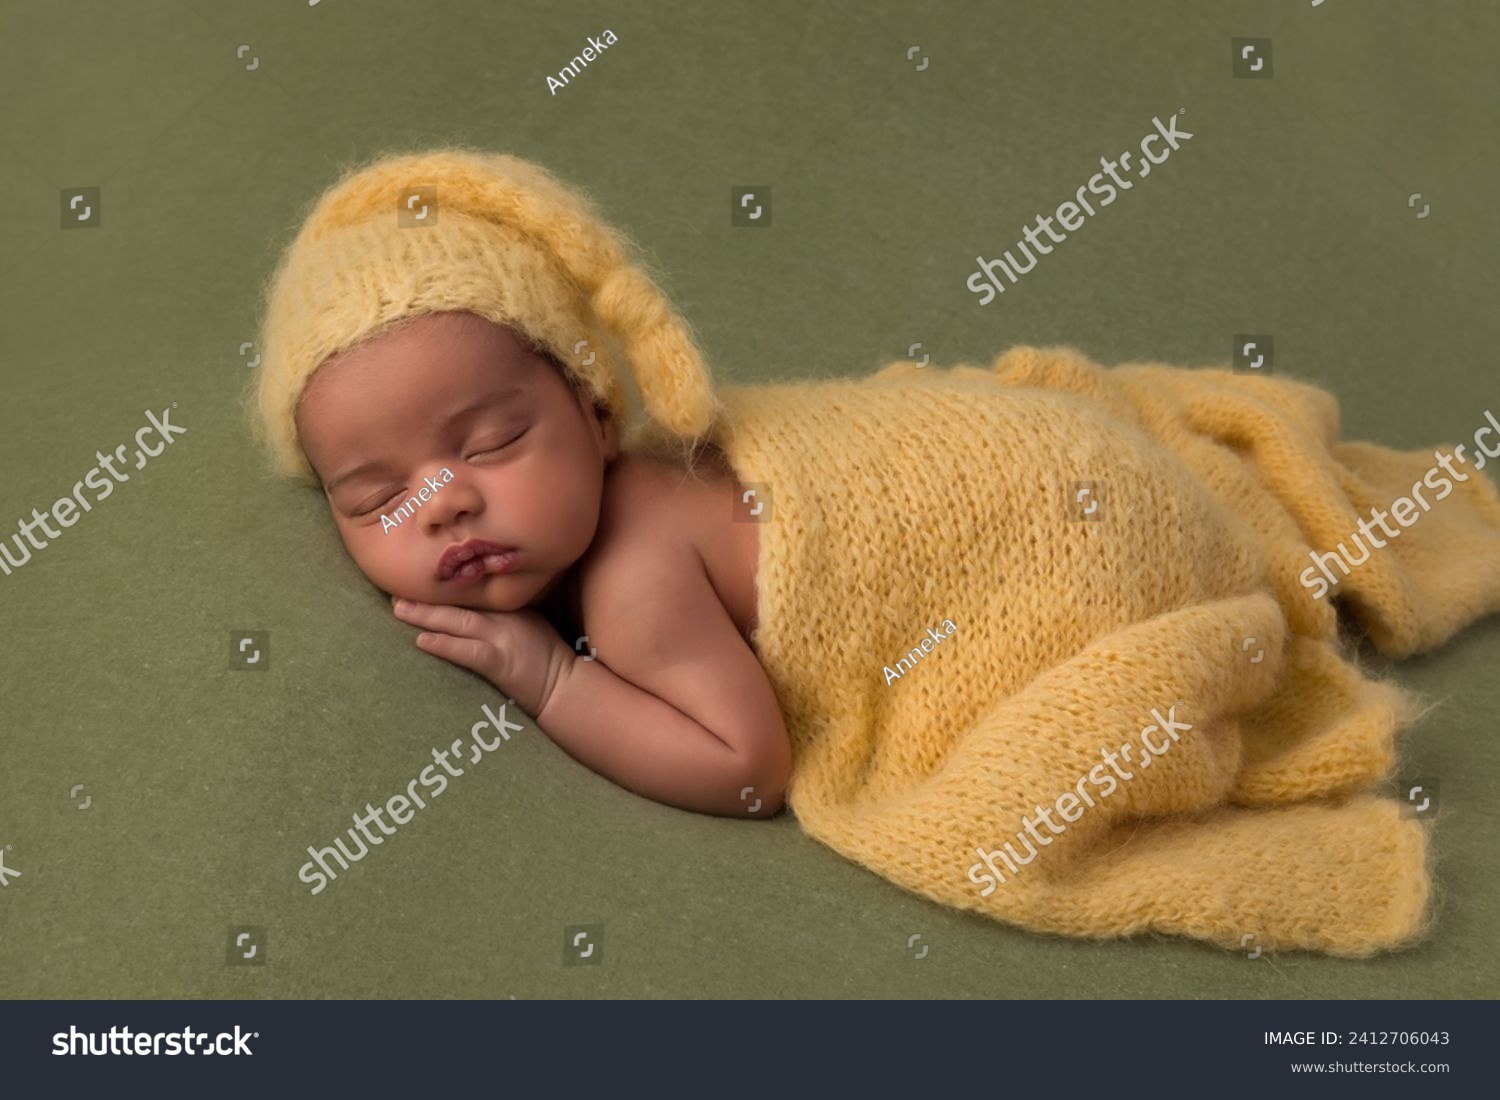 Cute little sleeping African biracial newborn baby sleeping with a knitted yellow hat and wrap #2412706043